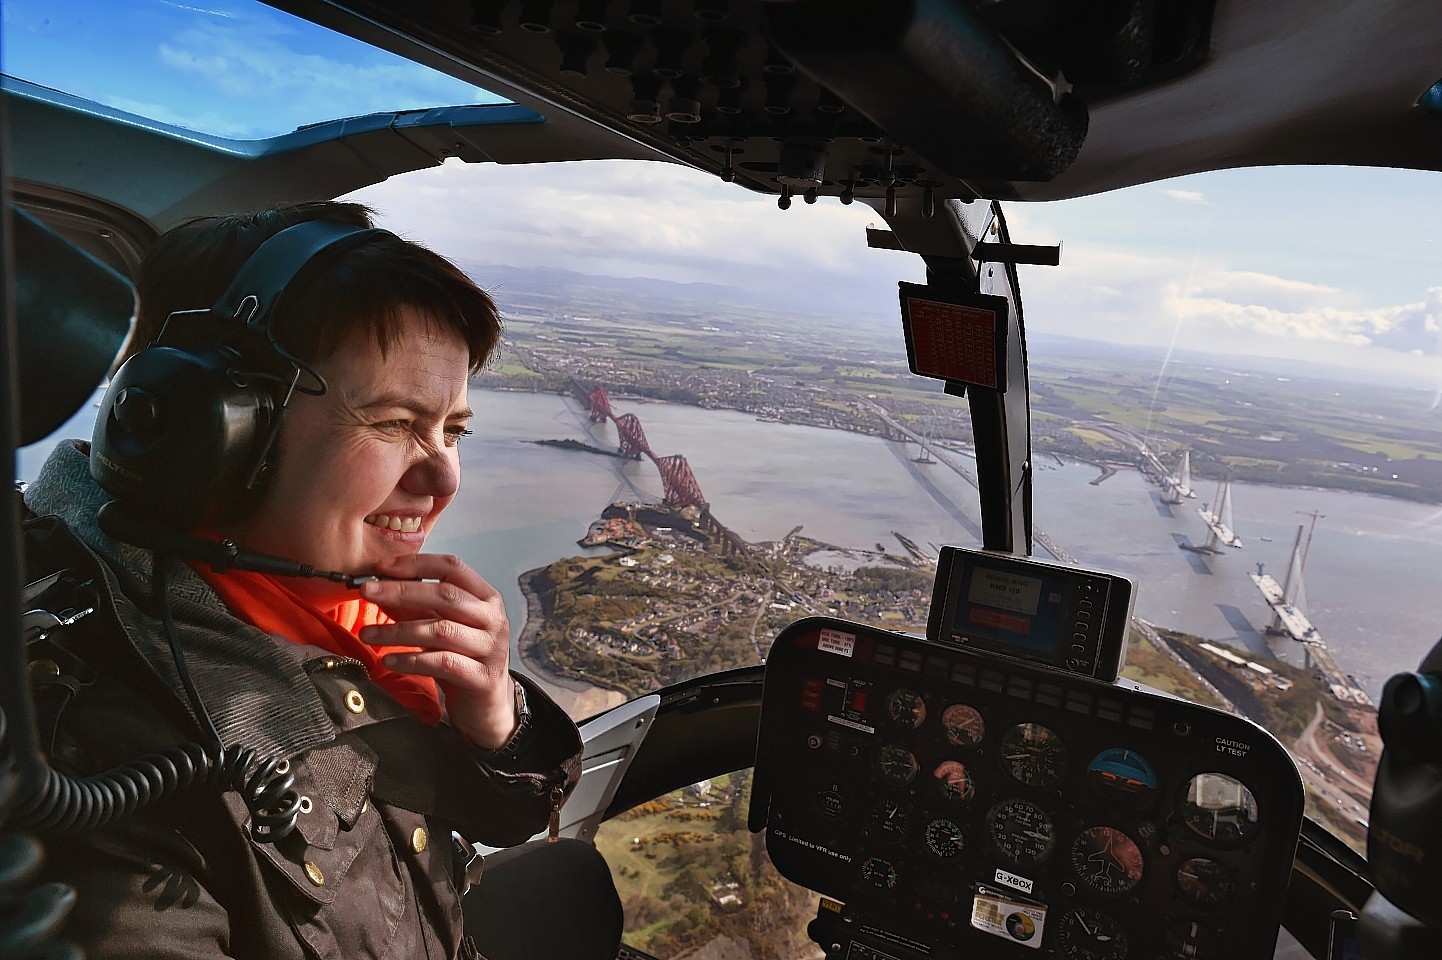 Ms Davidson looks out of her helicopter window